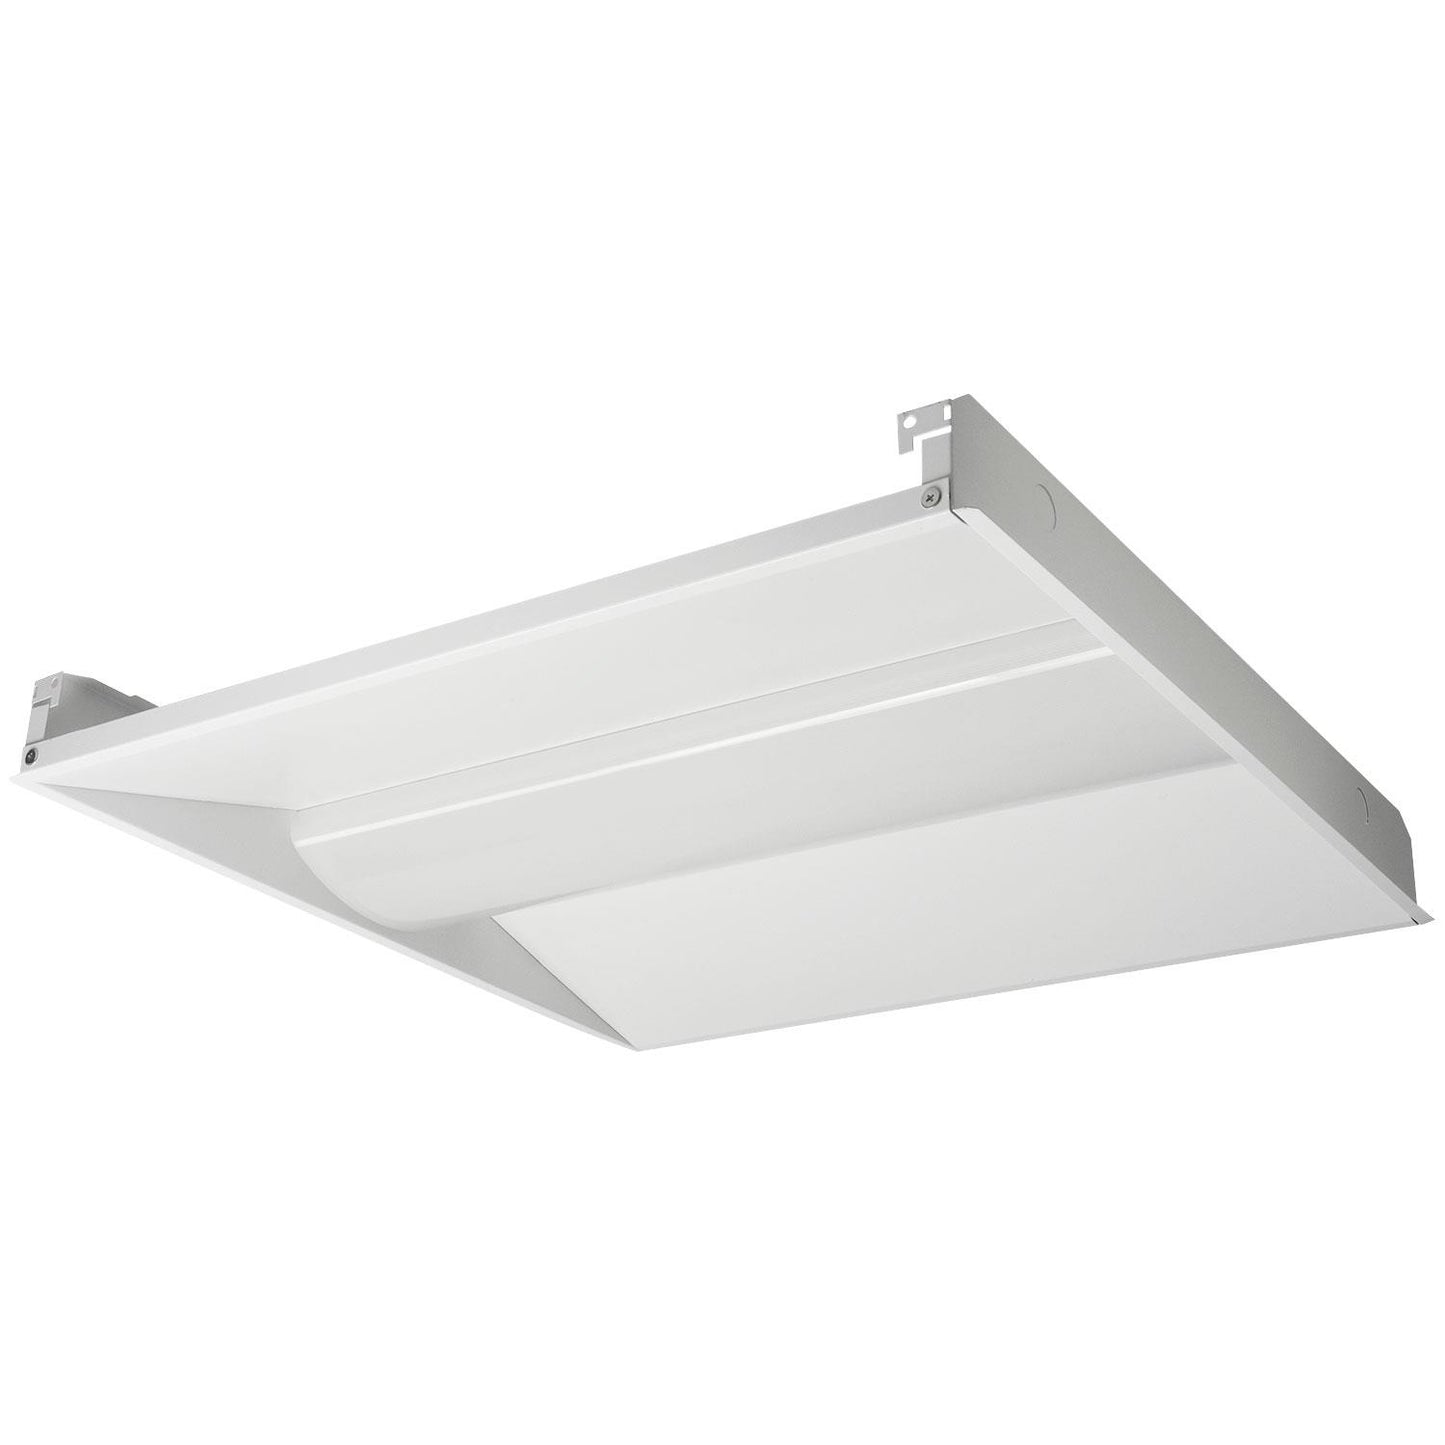 Sunlite Tunable LED 2x2-Foot Lay-In Troffer Fixture, Selectable Wattage (20W/25W/30W), Selectable Color Temperature (35K/40K/50K), 120/277 Volts, Dimmable, 50,000 Hour Life Span, White Finish, UL Listed, DLC Listed